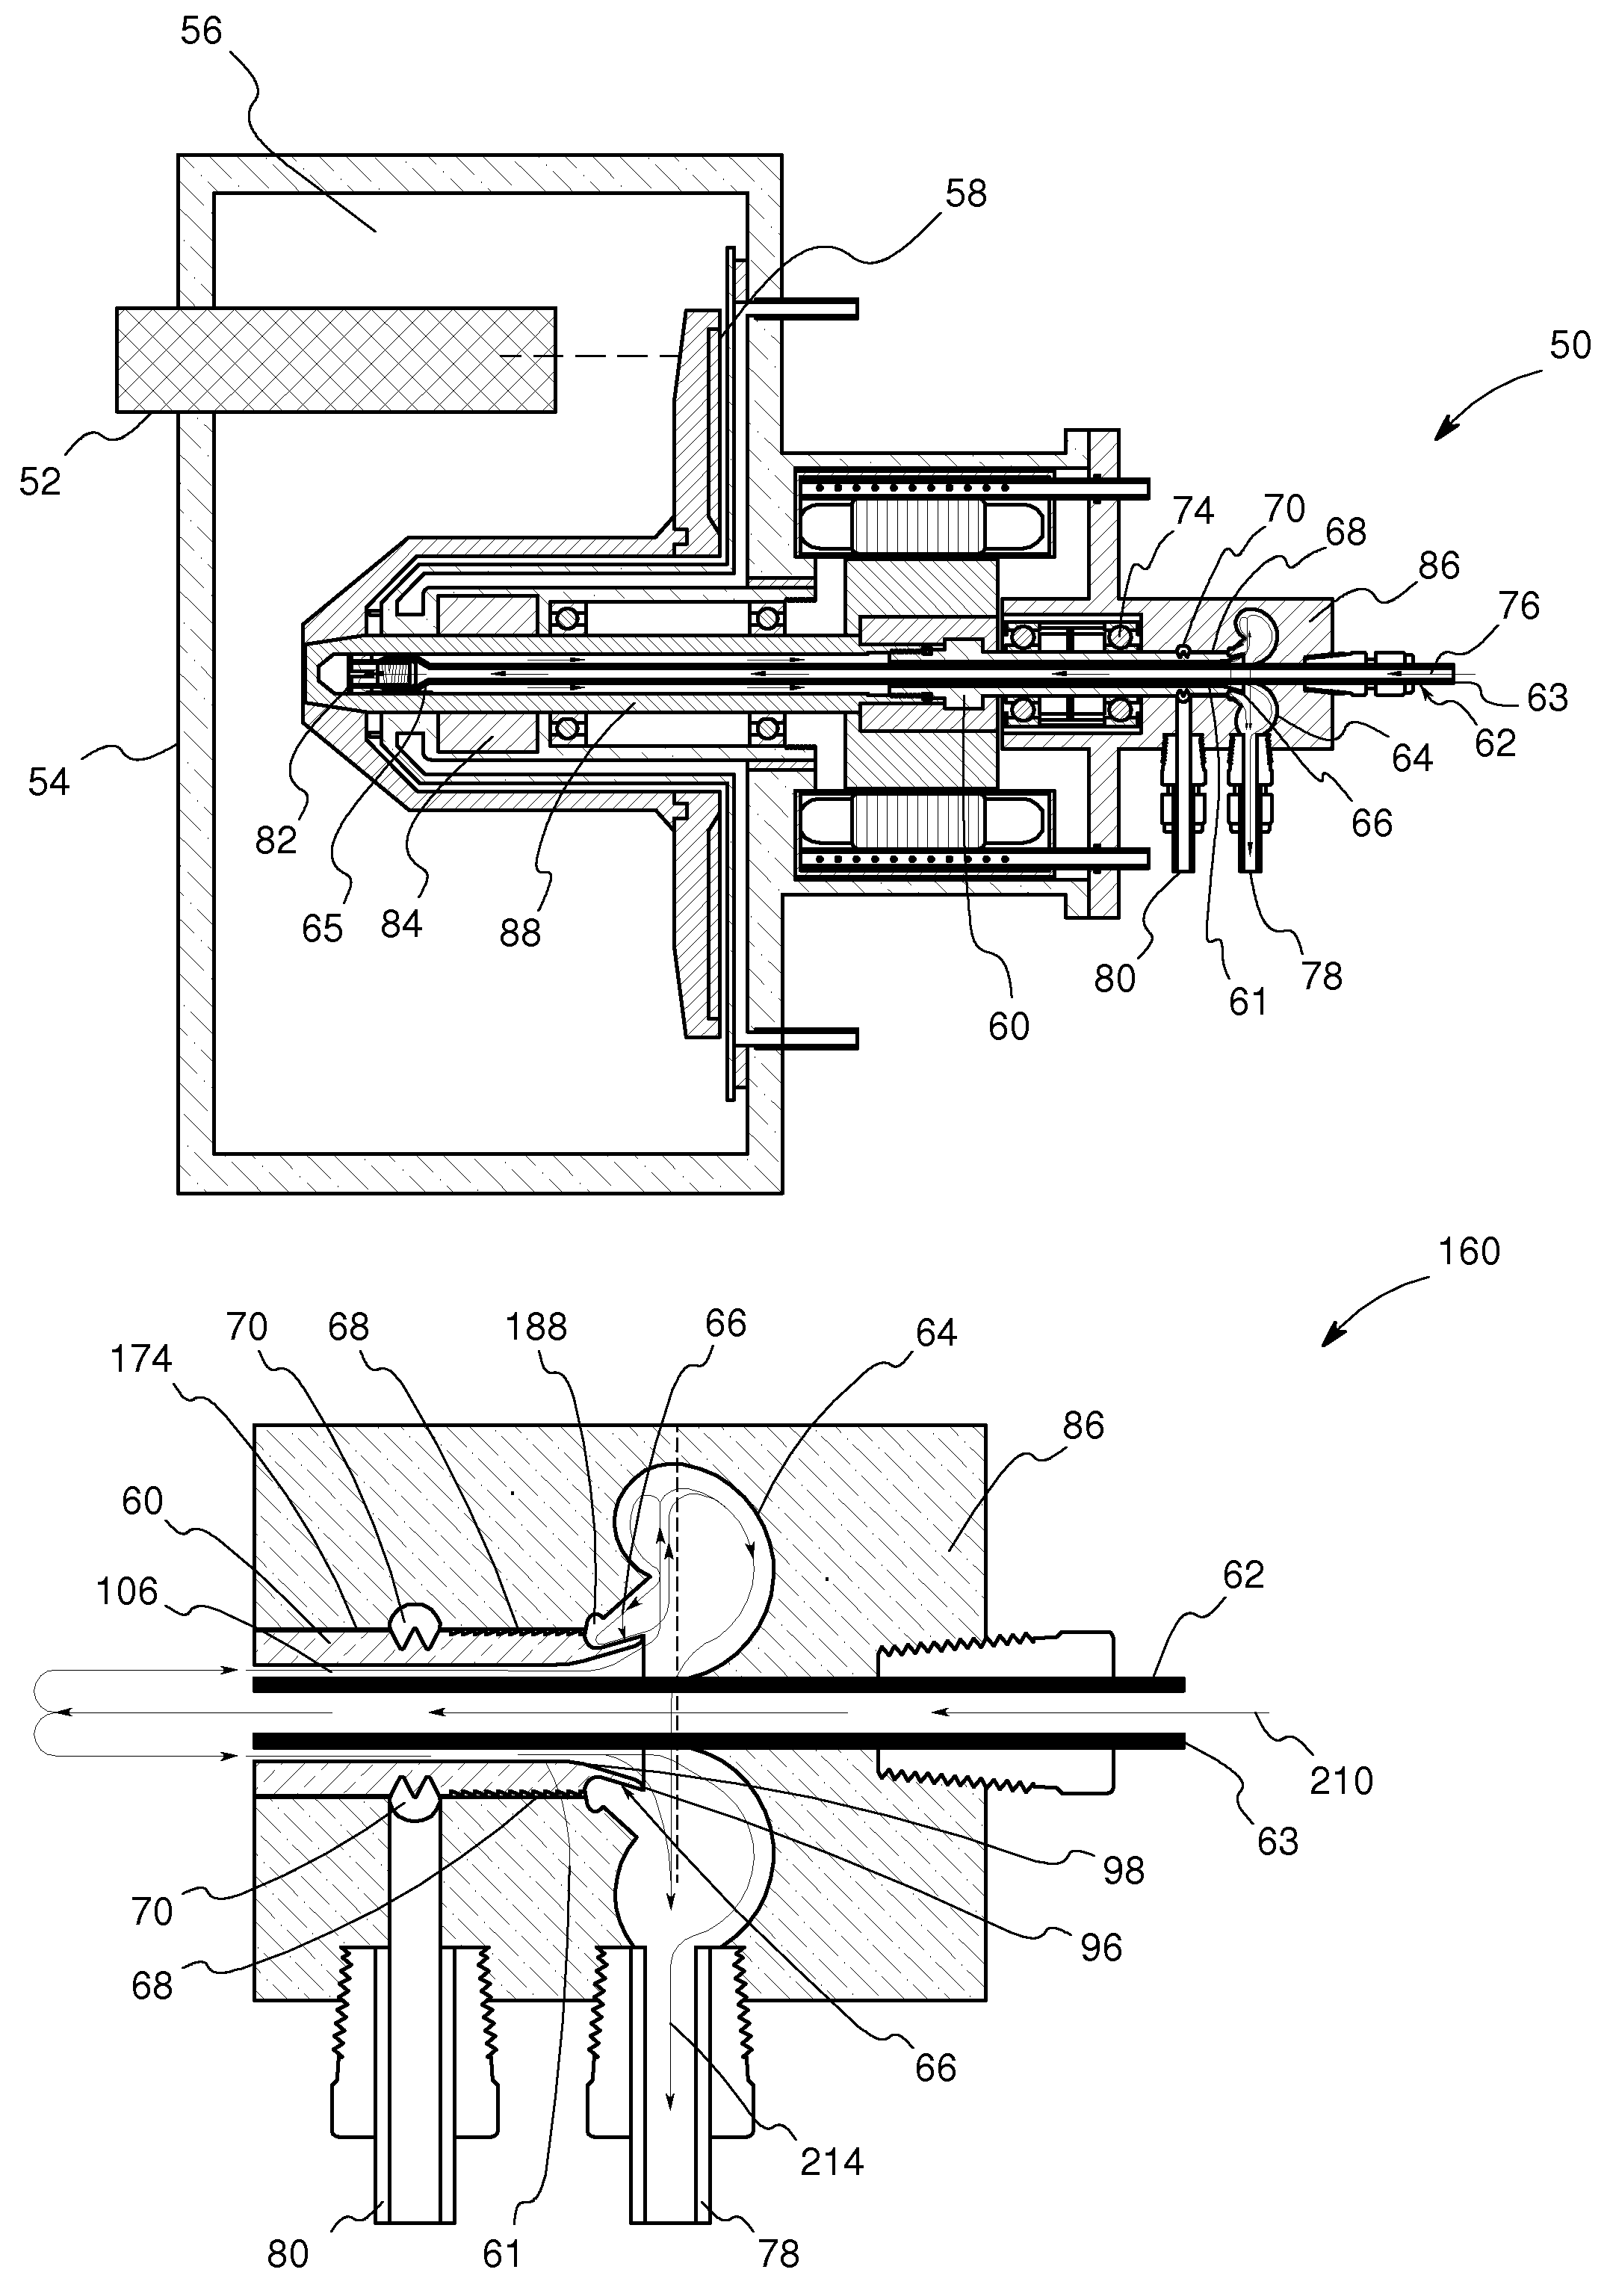 Rotating union for a liquid cooled rotating x-ray target